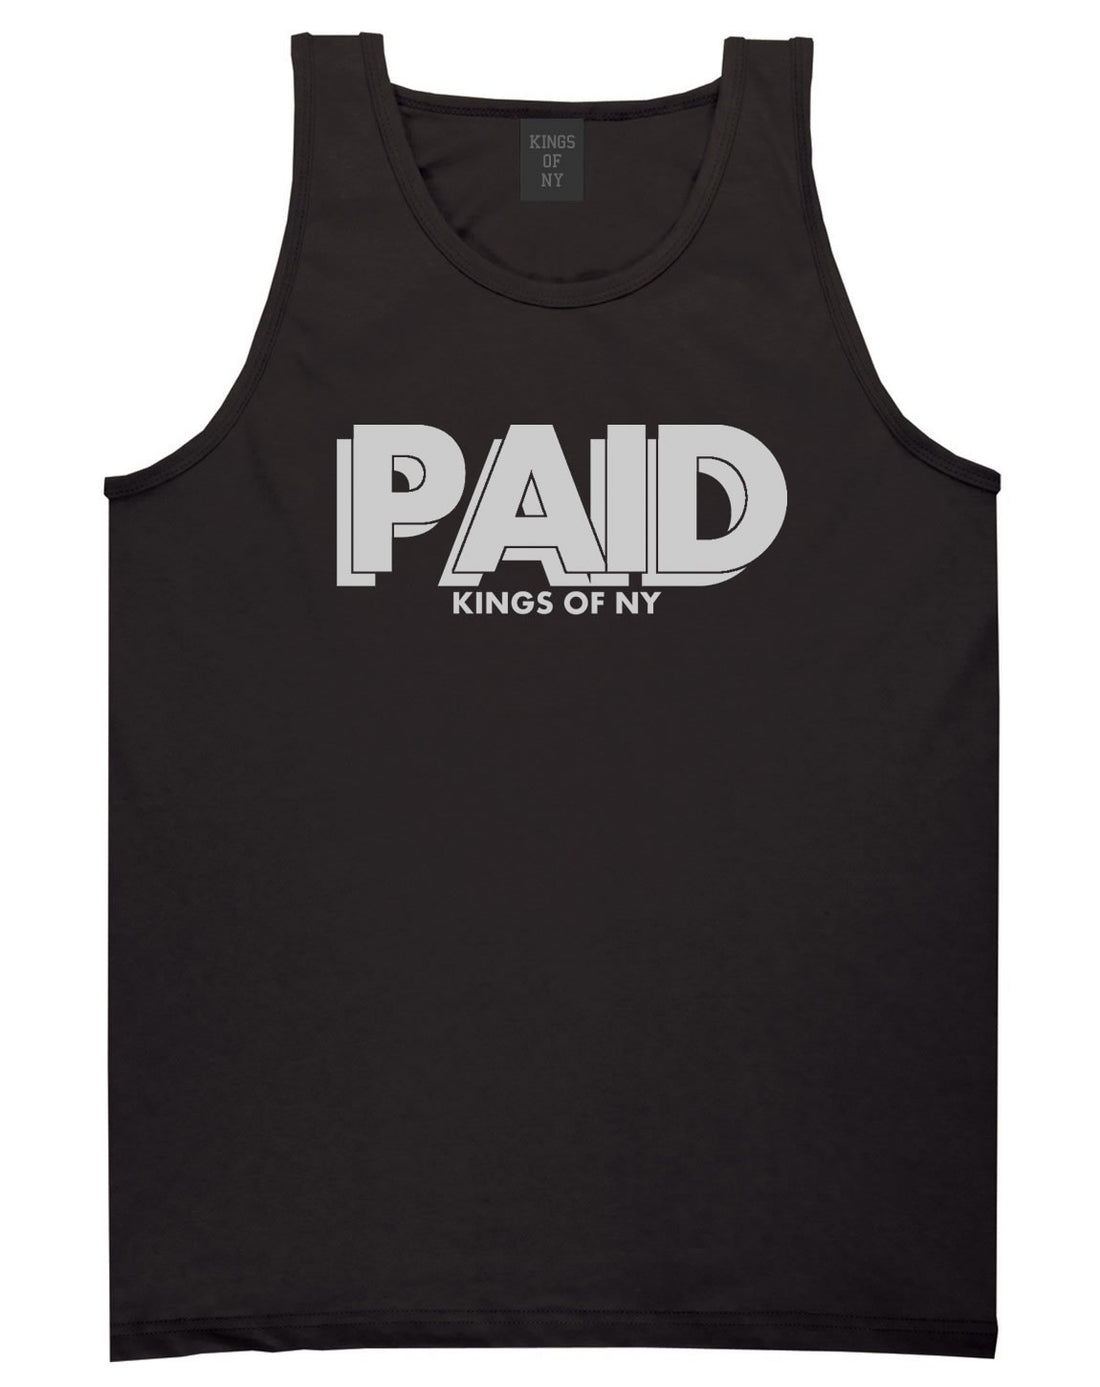 PAID Kings Of NY W15 Tank Top in Black By Kings Of NY